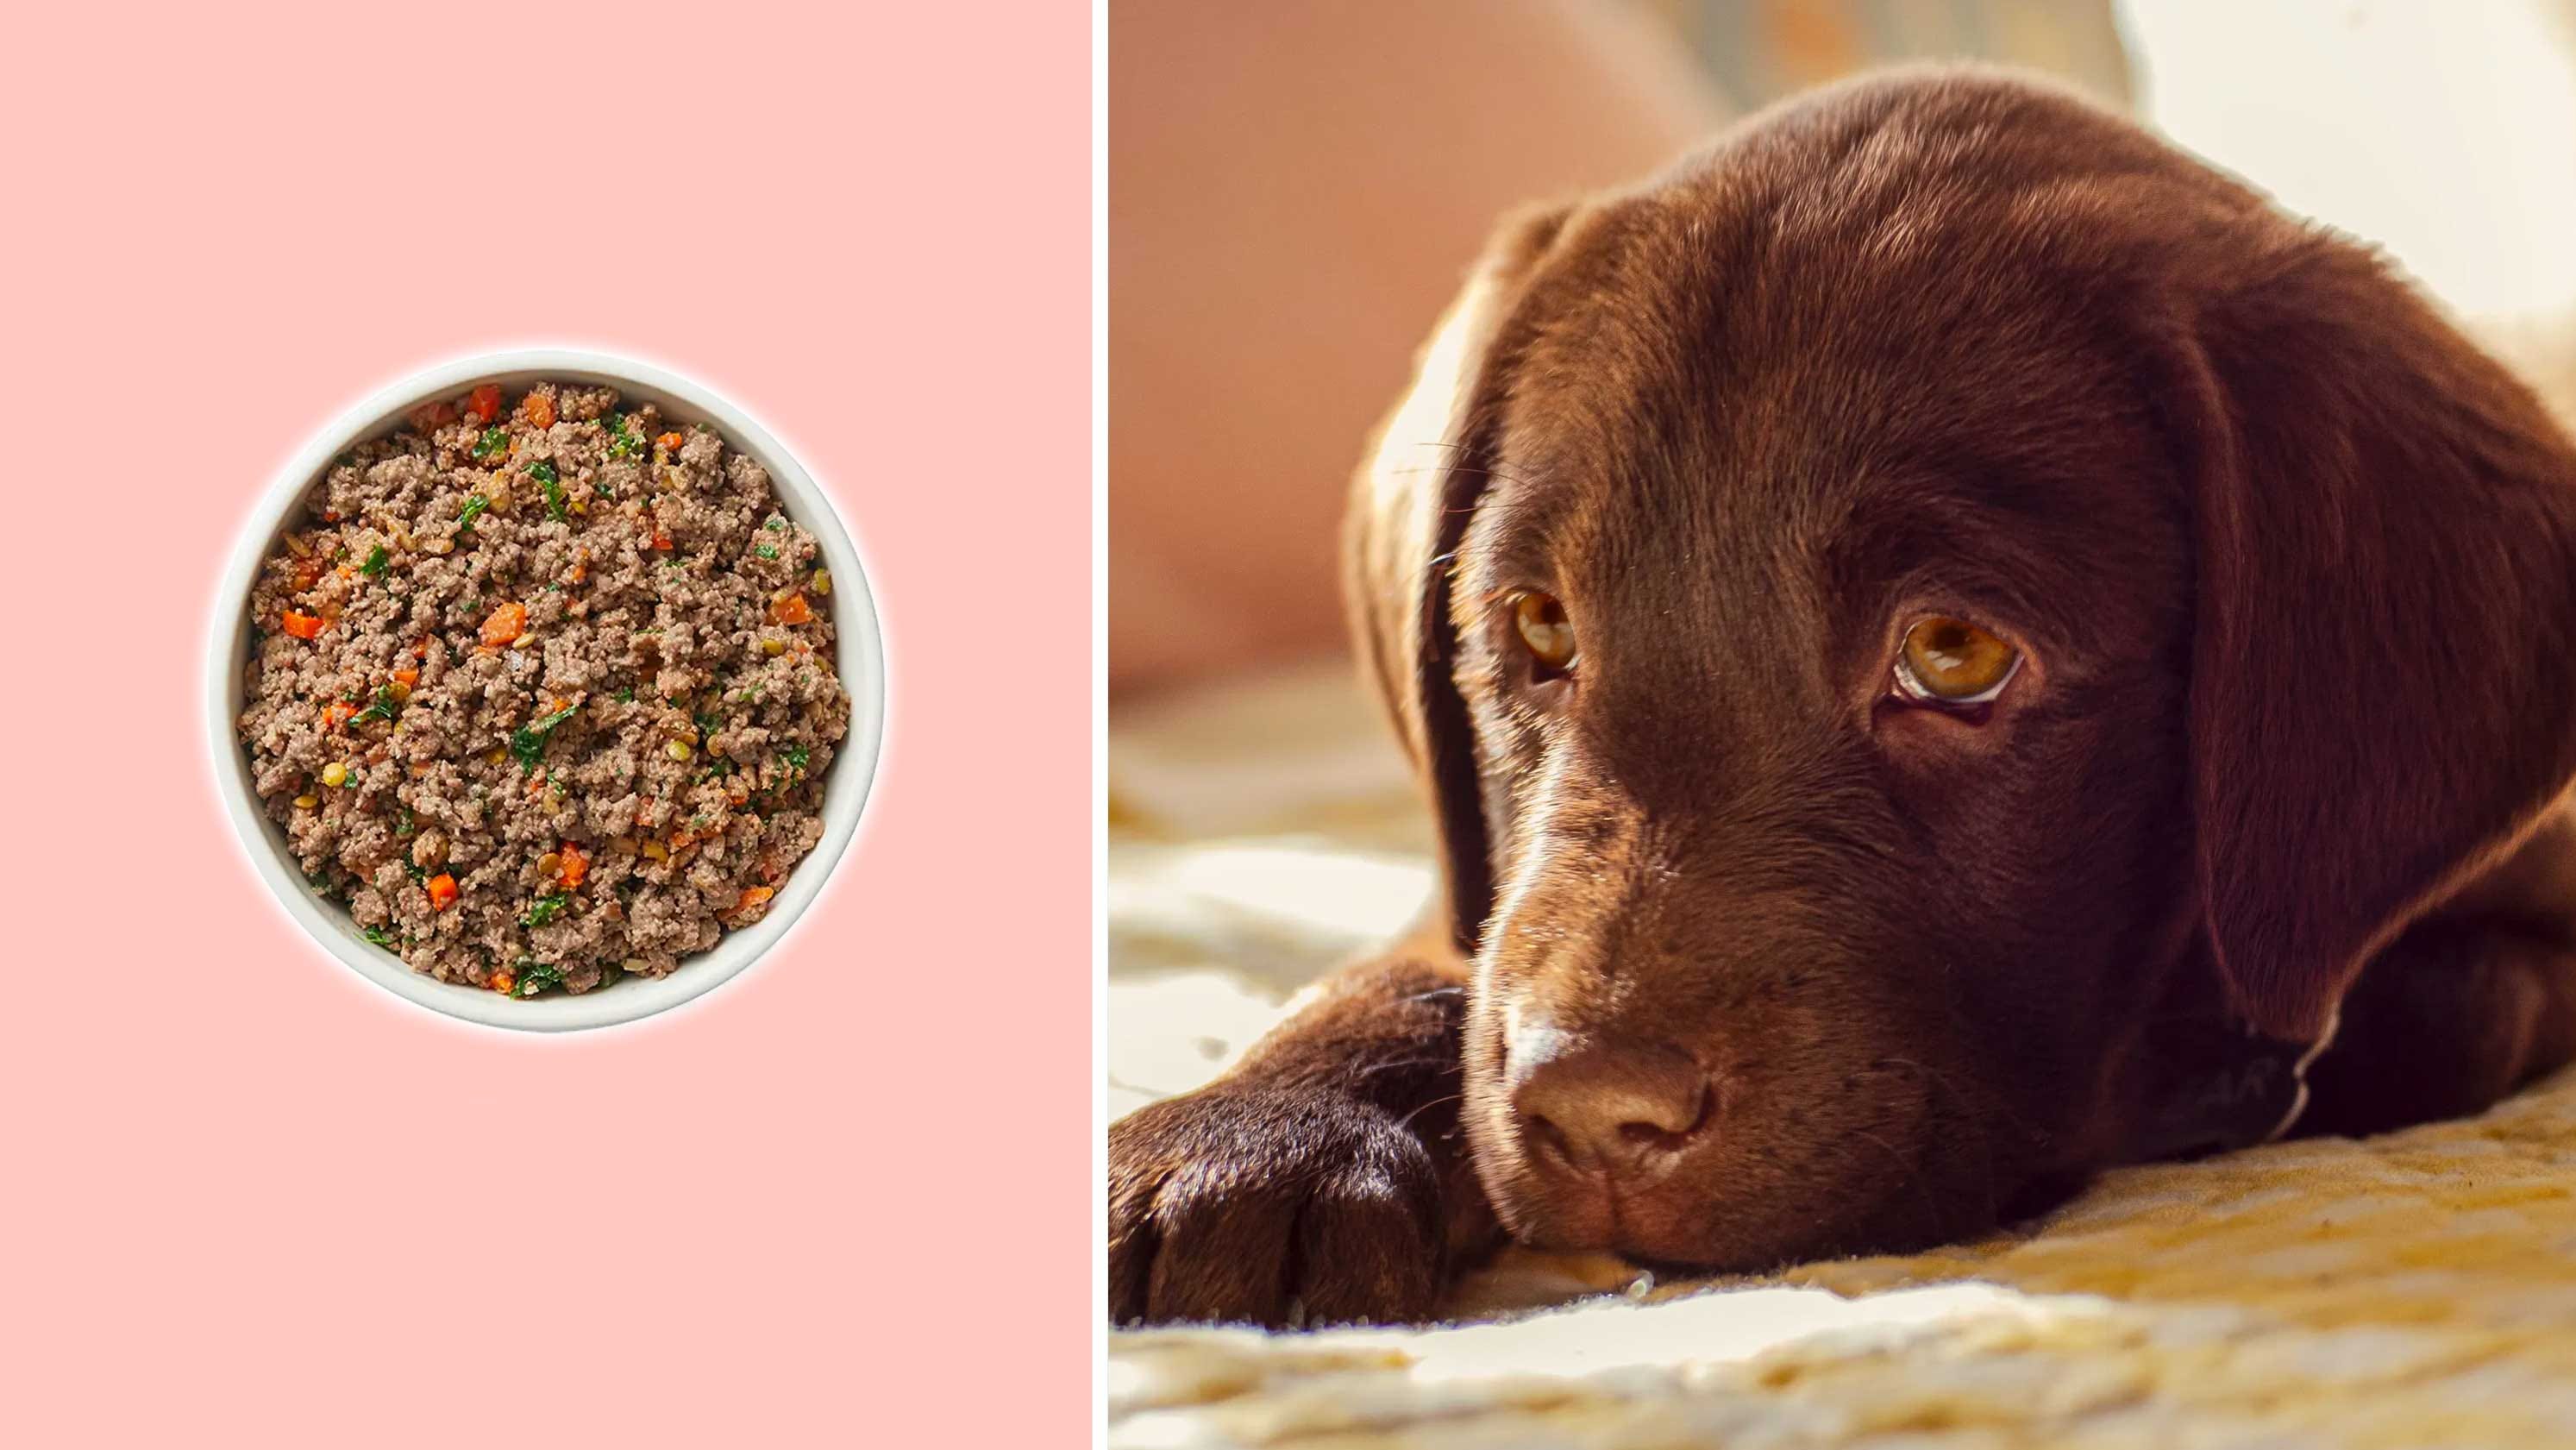 The Farmer's Dog Super Bowl Get 50 off your first fresh dog food order